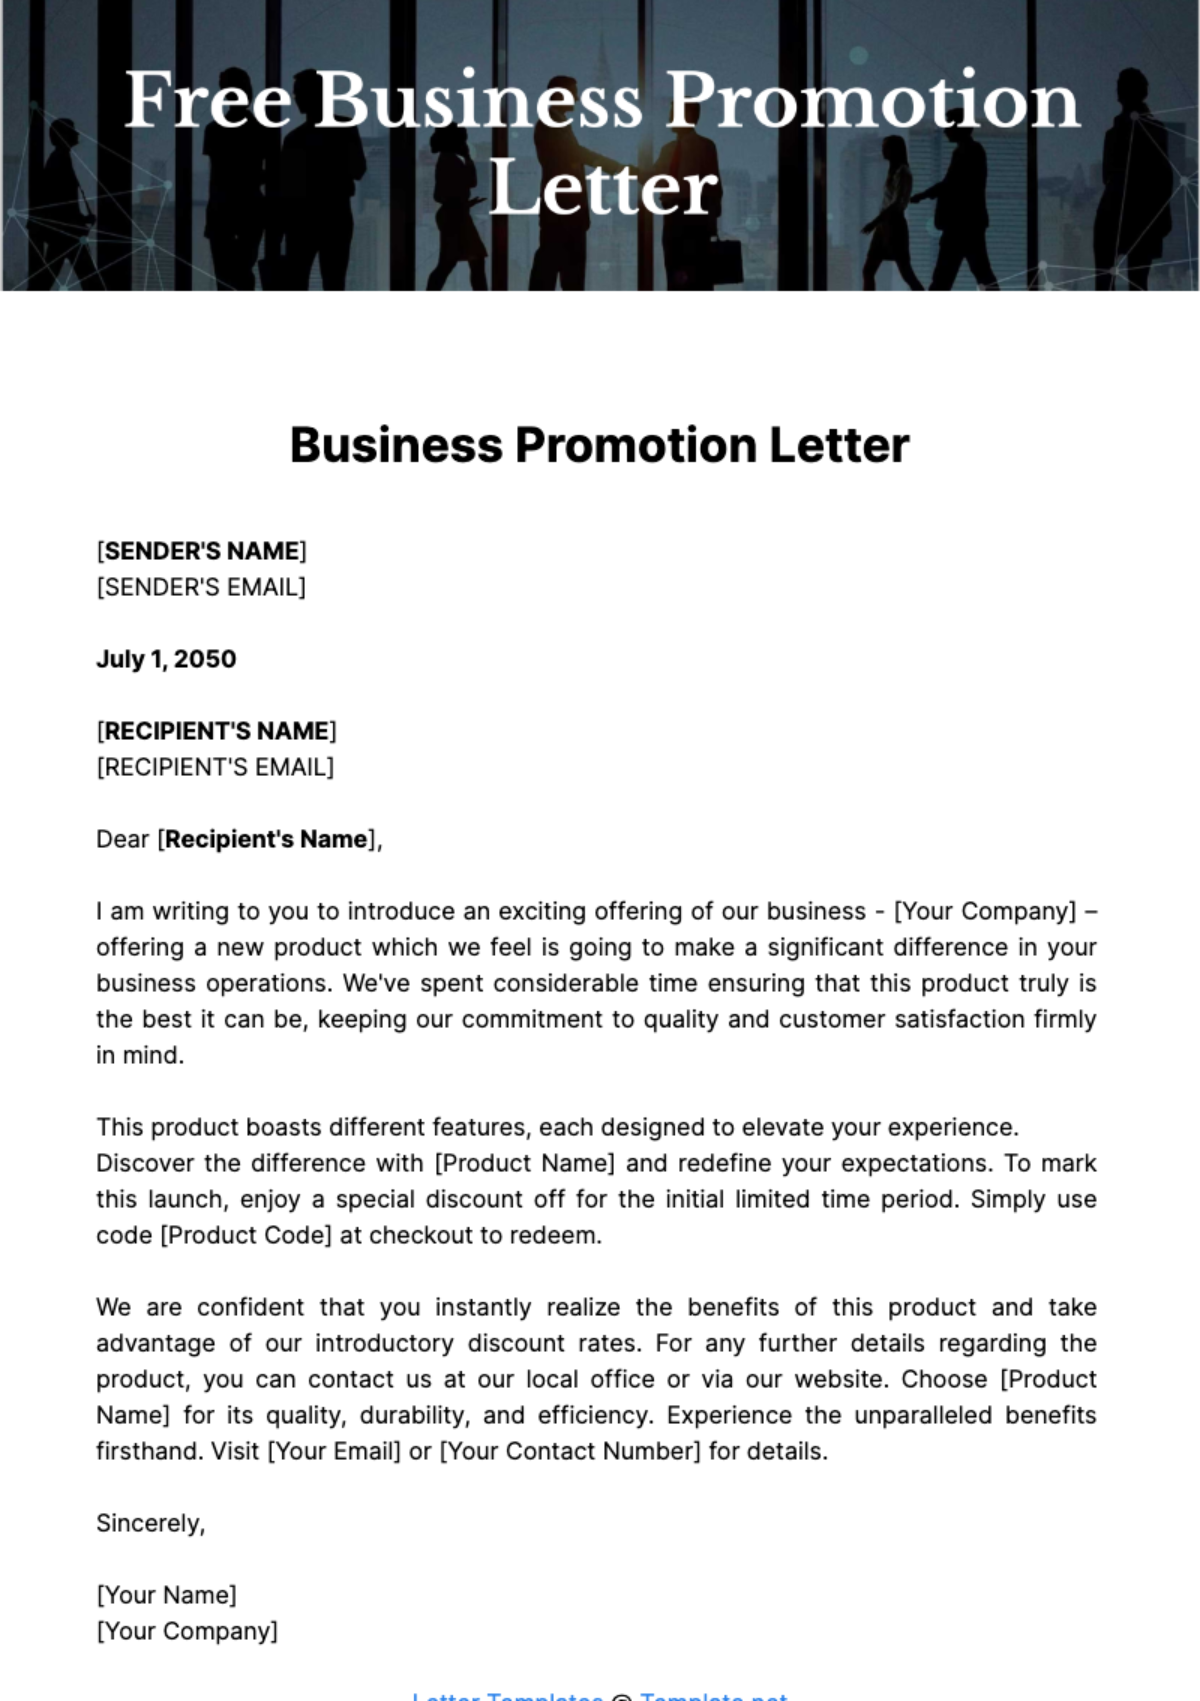 Free Business Promotion Letter Template